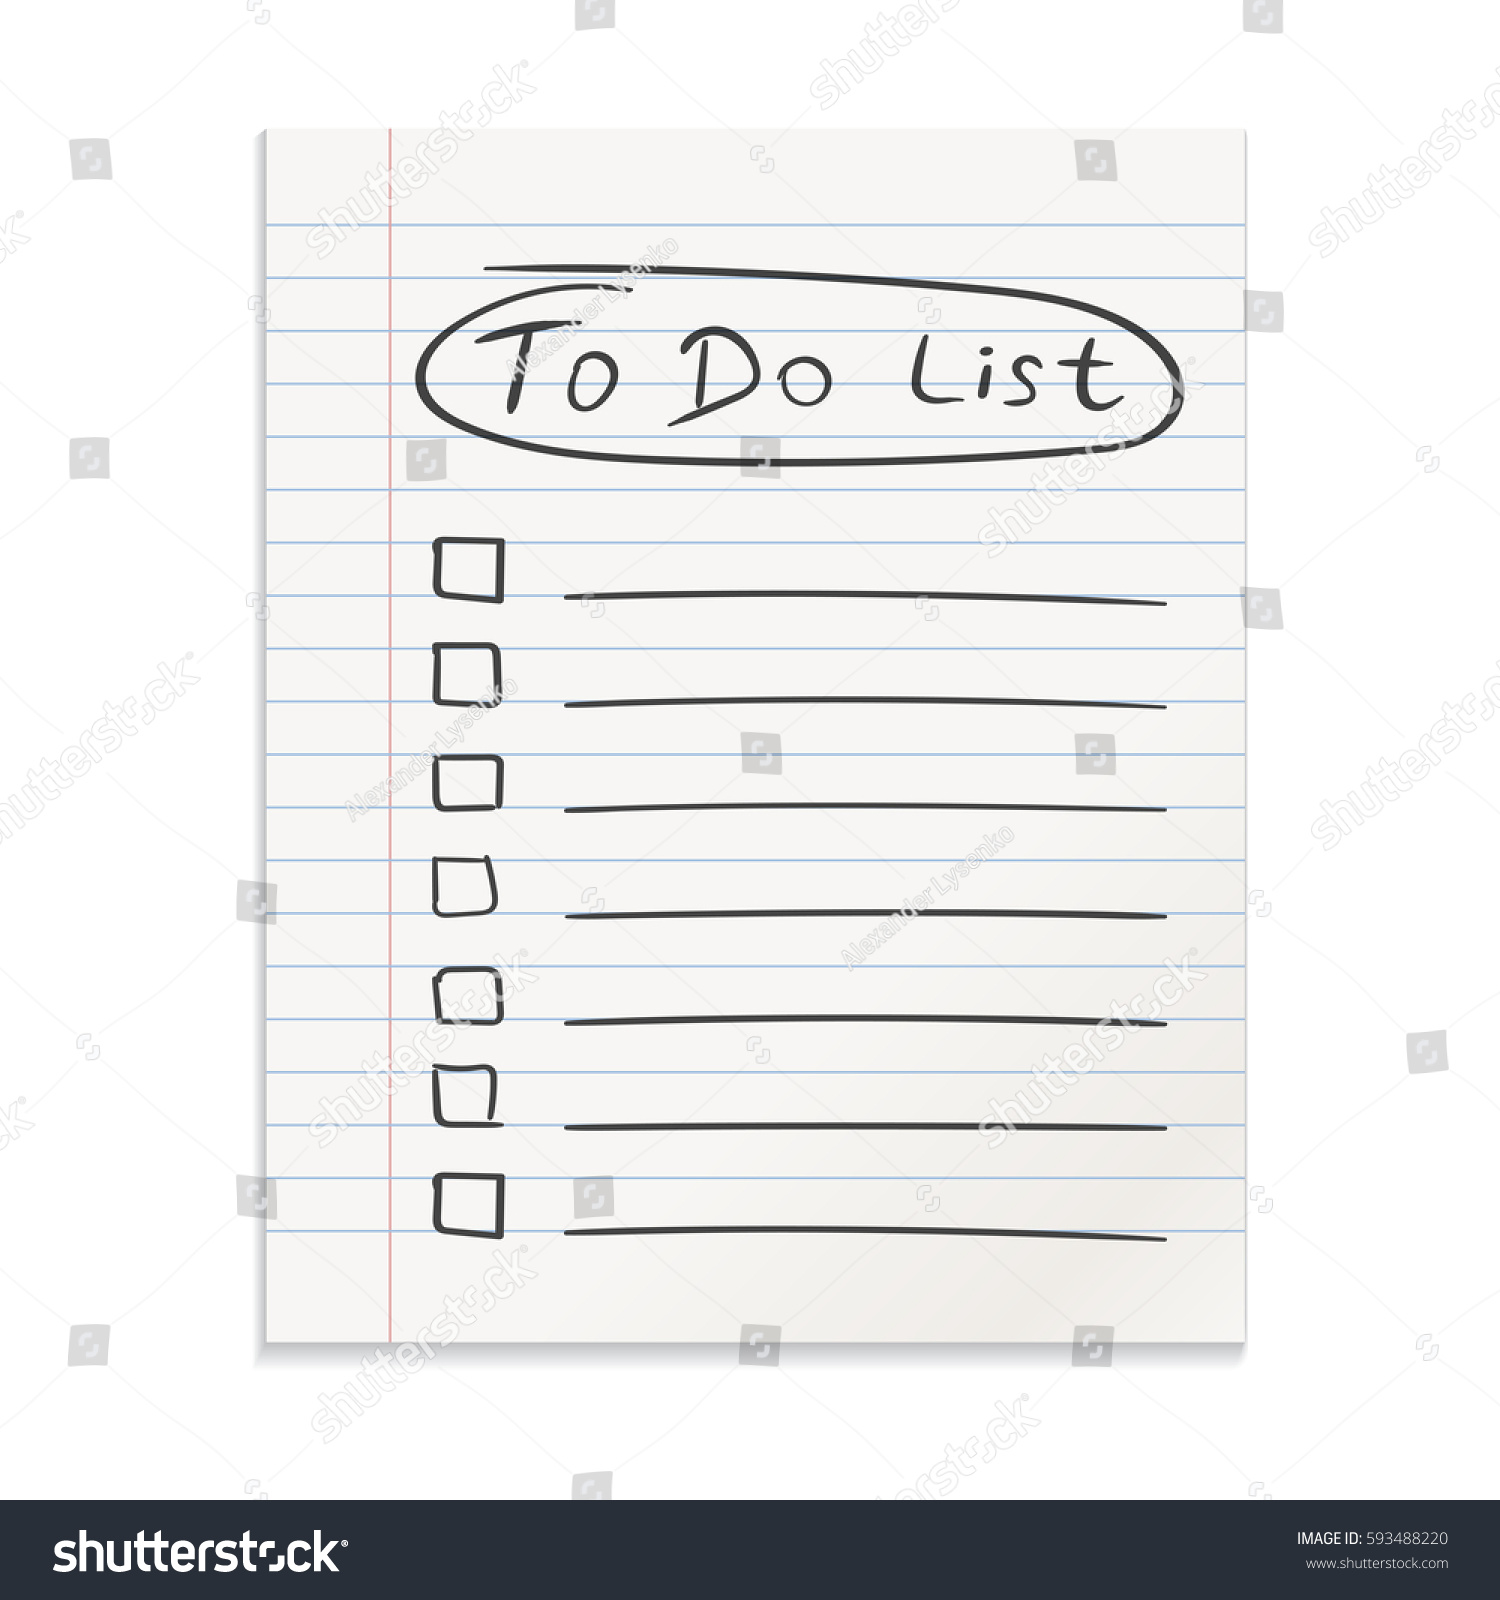 Realistic line paper note. To do list icon with hand drawn text. School business diary. Office stationery notebook on isolated background #593488220